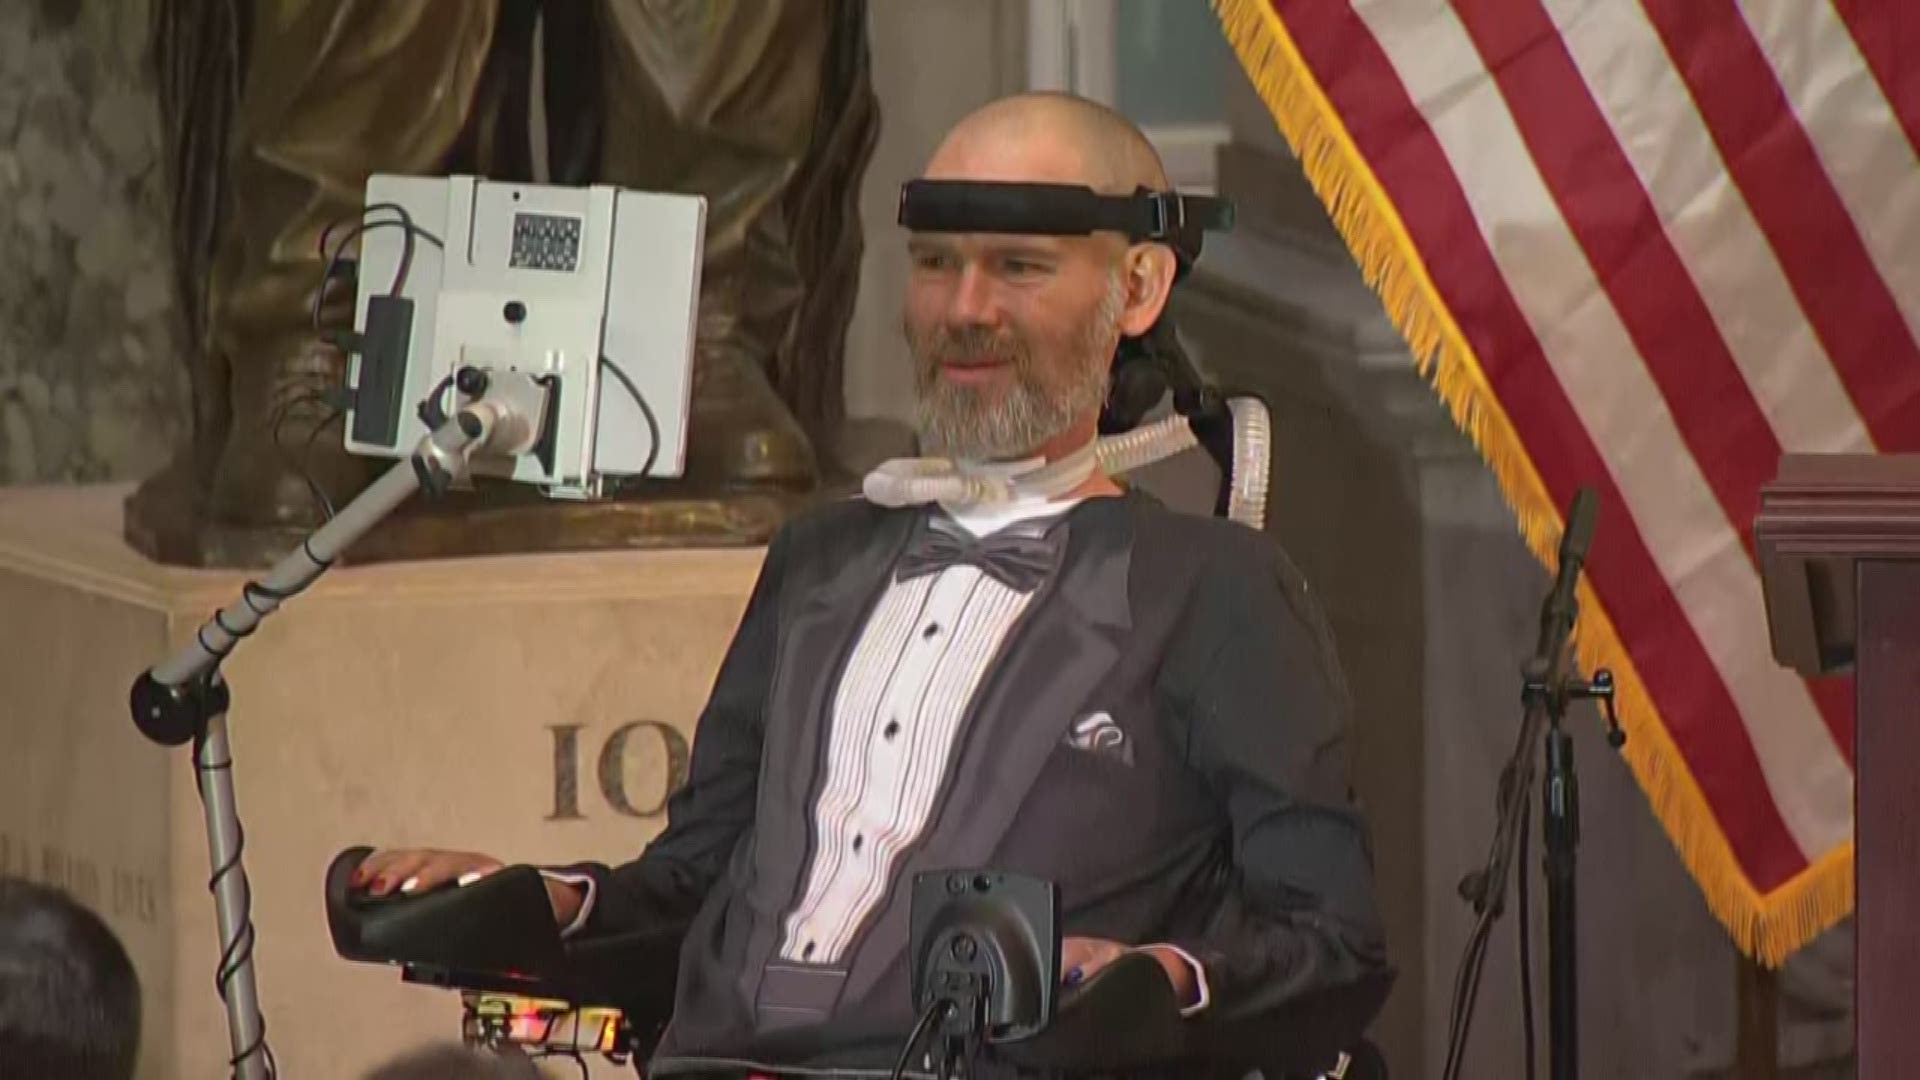 Steve Gleason talks about receiving the Congressional Gold Medal, what it means to him and those who have helped him along his path.